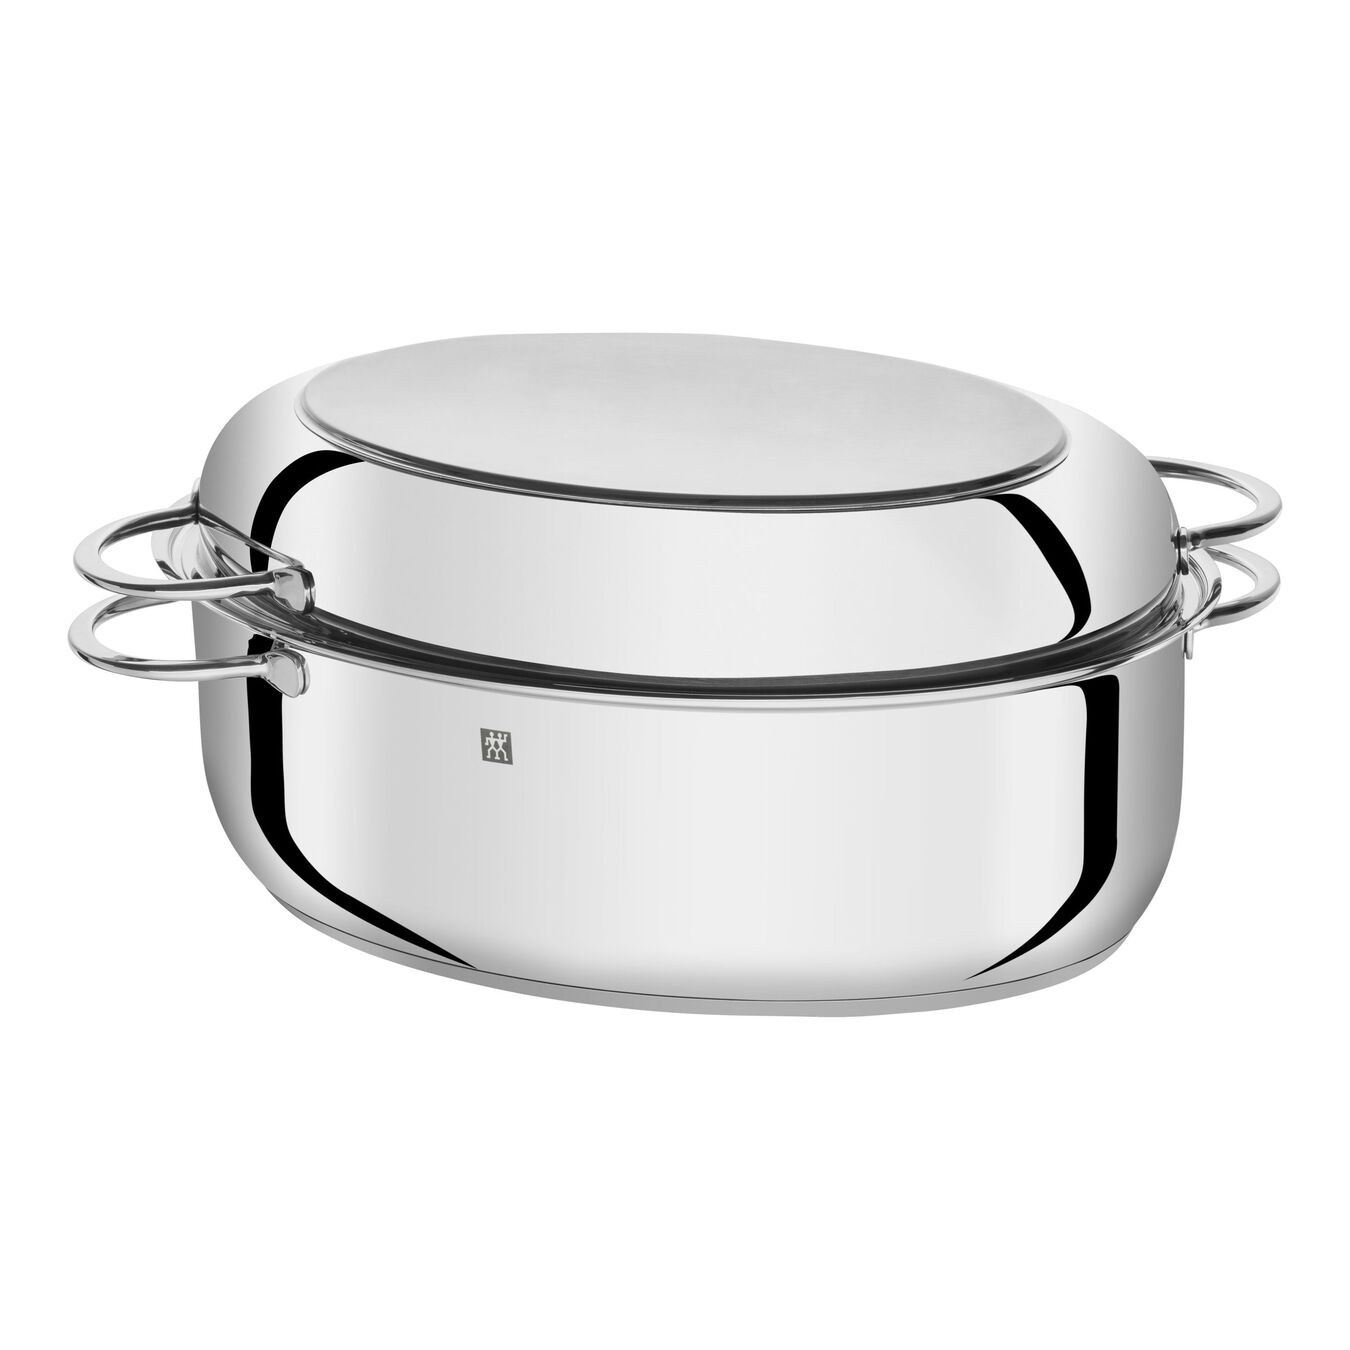 38 cm 18/10 Stainless Steel oval Roaster, silver,,large 1